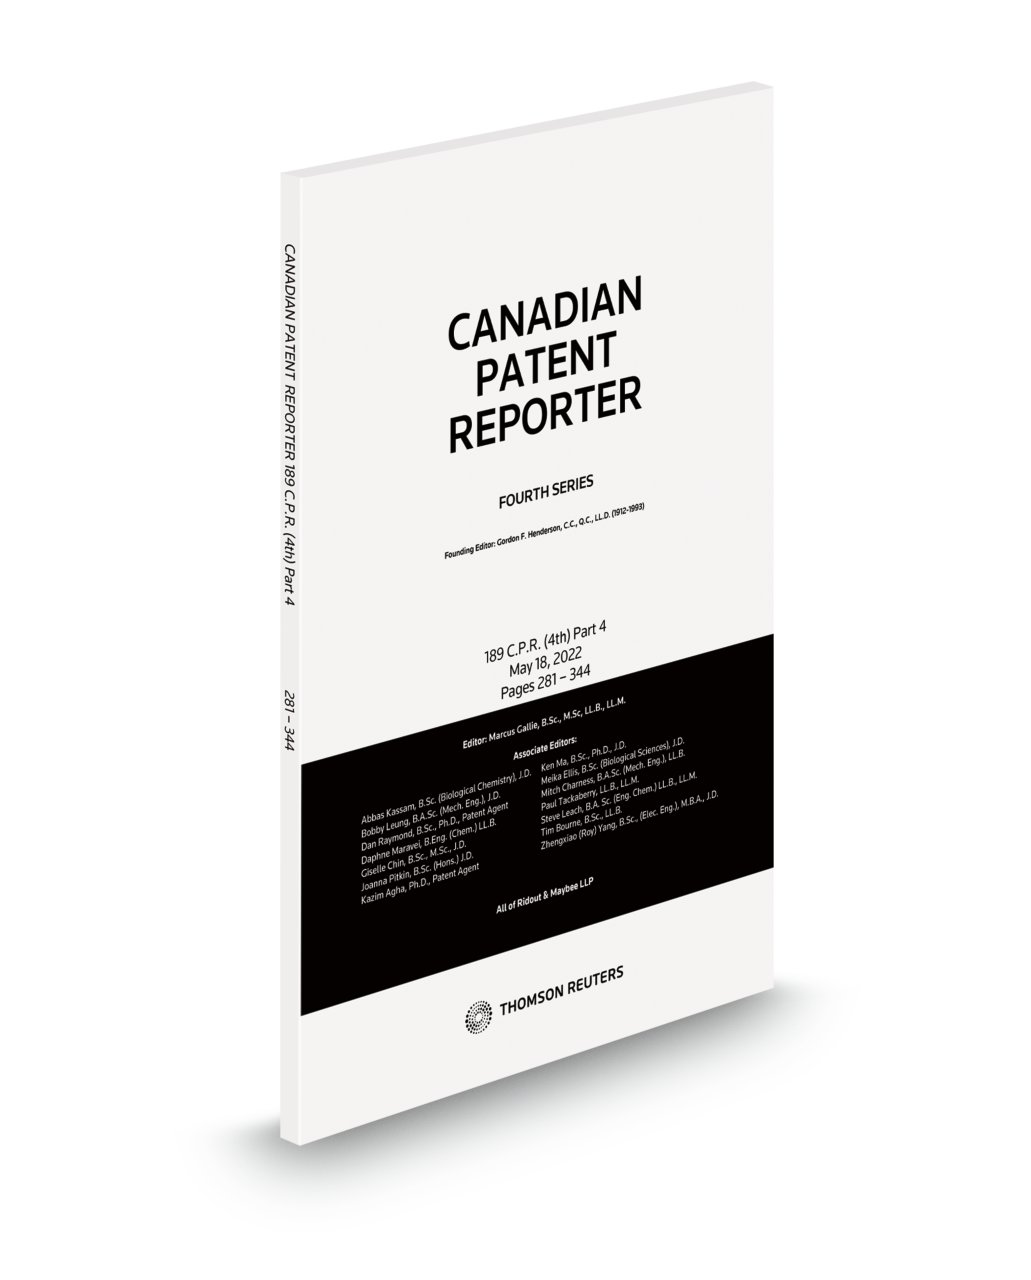 Cover of Canadian Patent Reporter, 4th Series